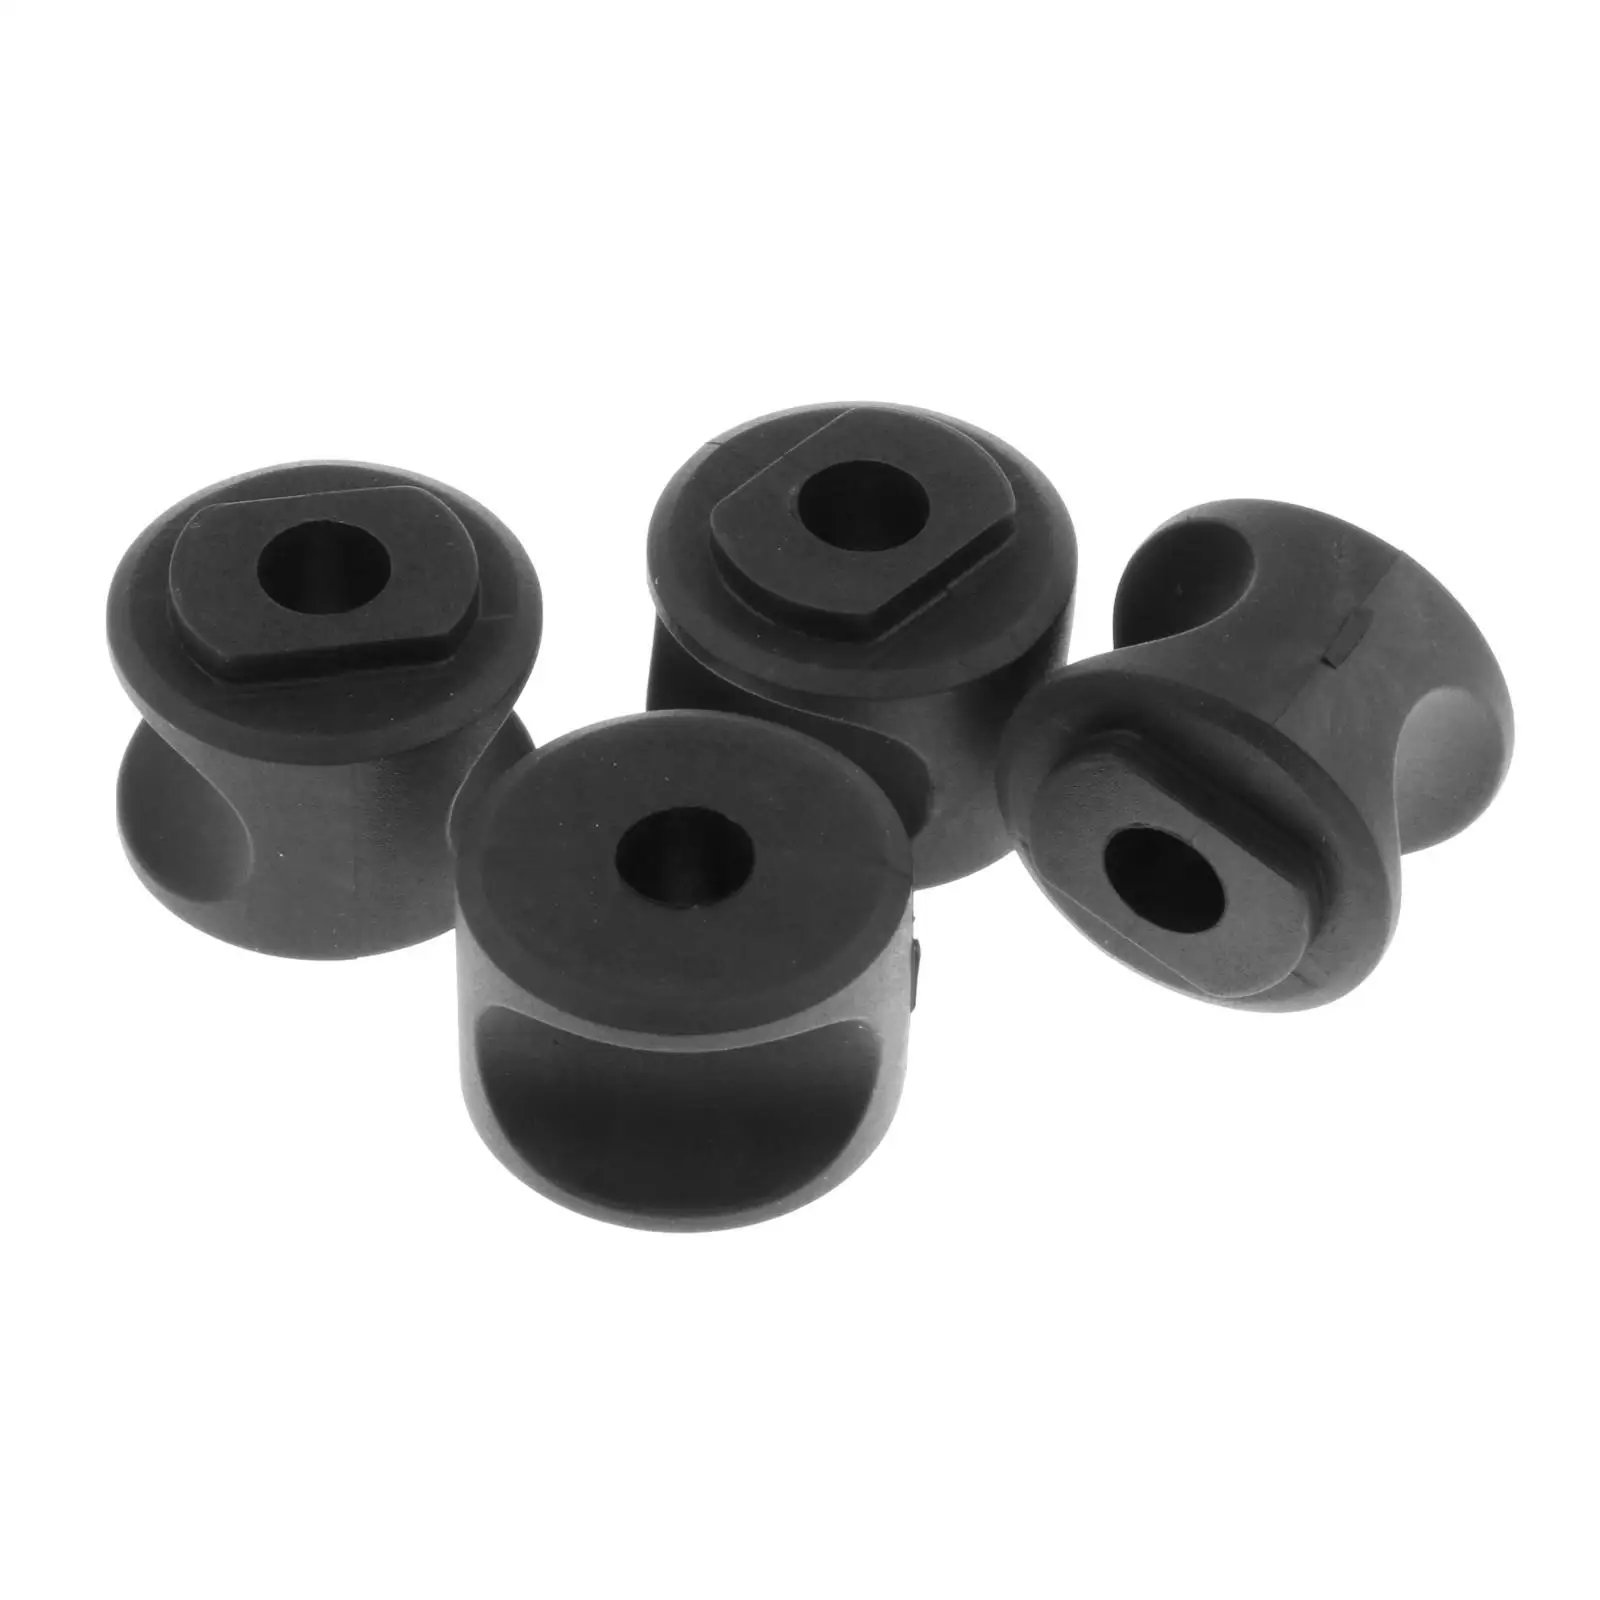 8Pieces Rear Stabilizer Support Bushing for 1997 Sportsman 500